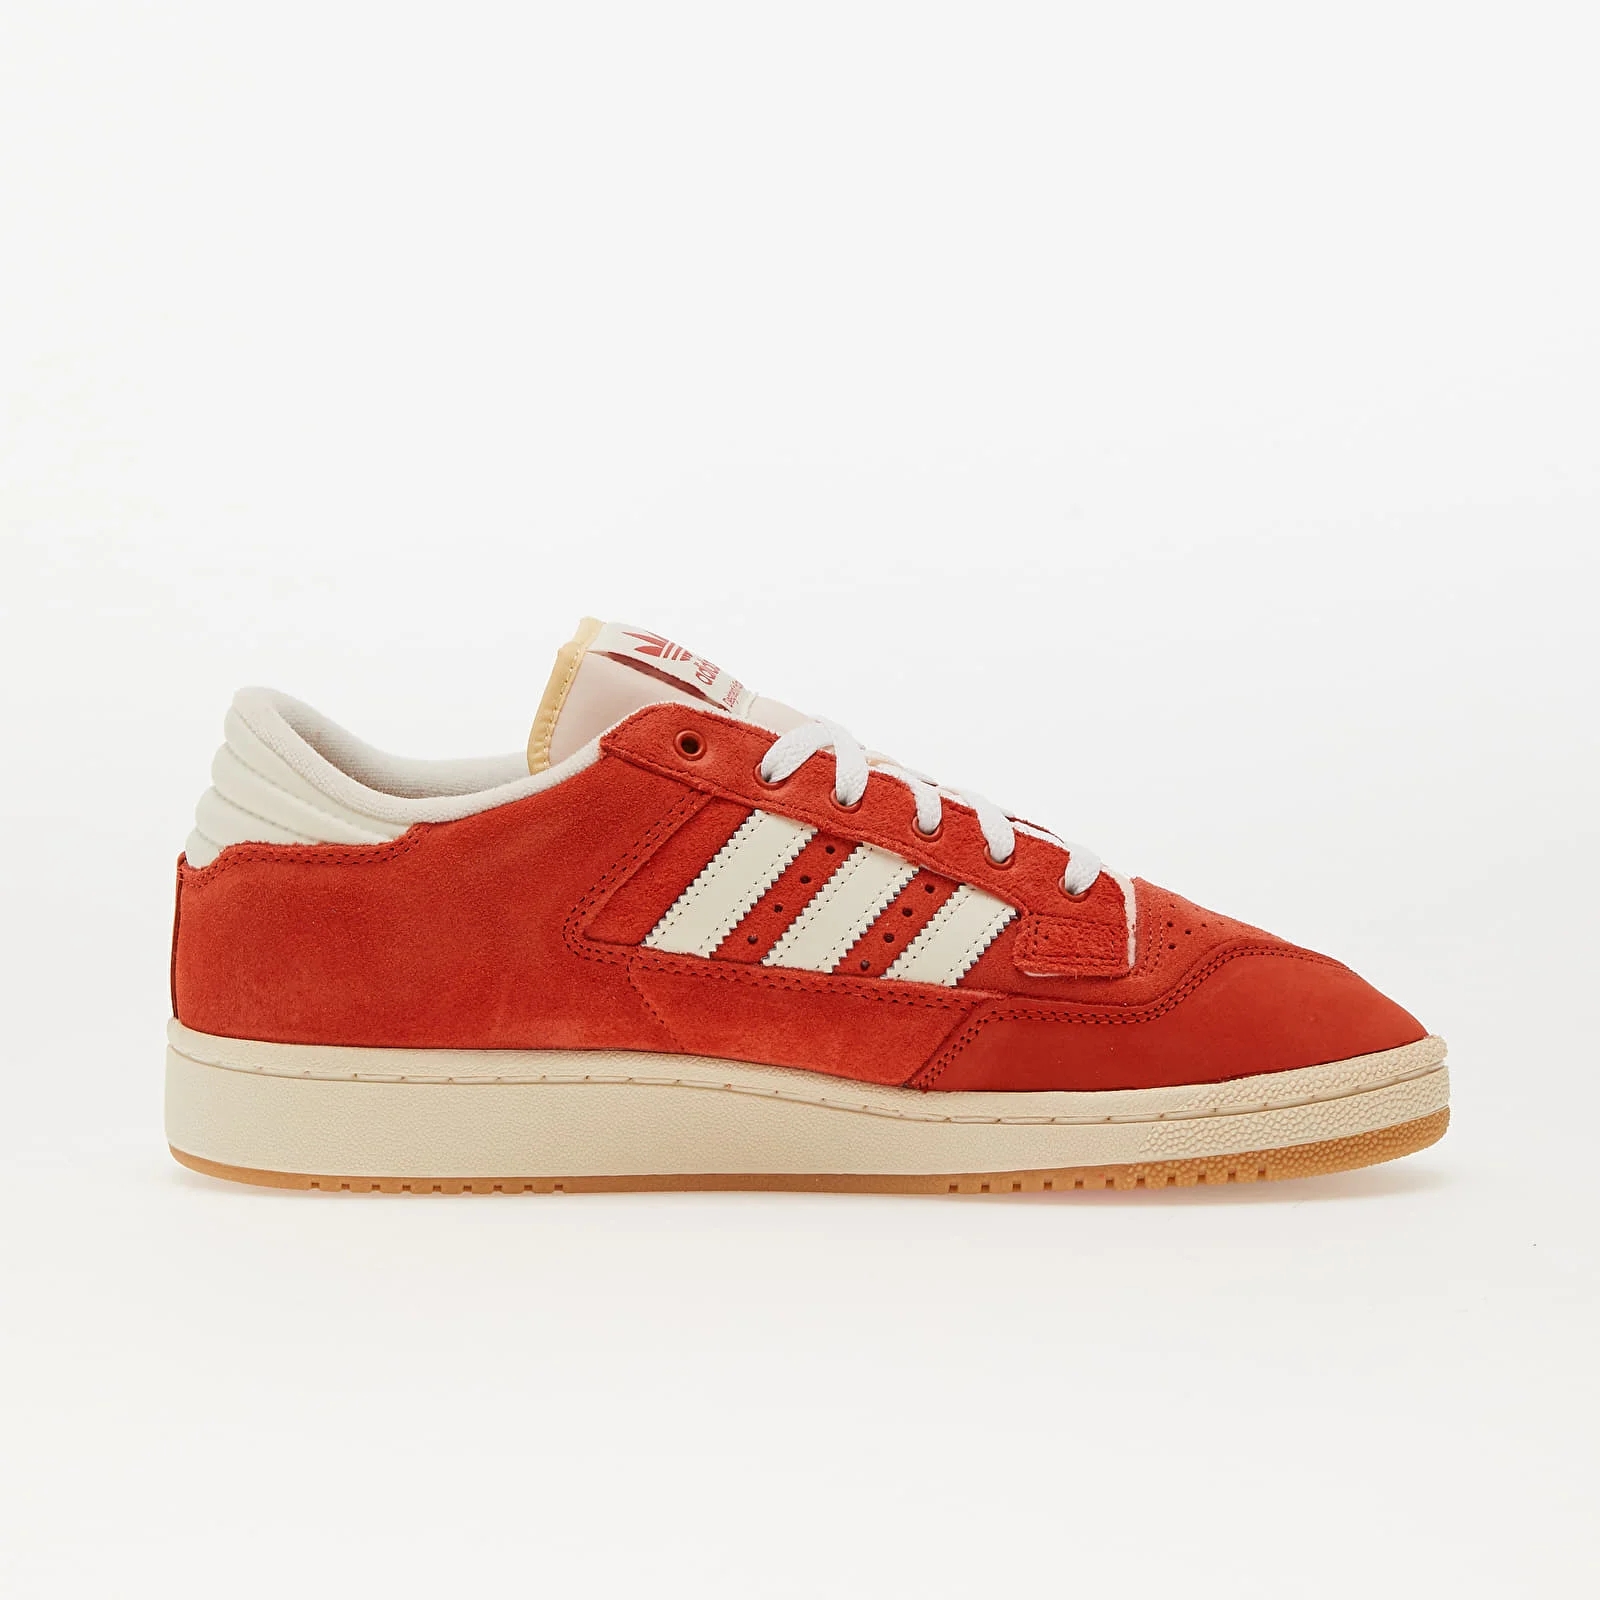 adidas Centennial 85 Lo Preloved Red/ Core White/ Off White